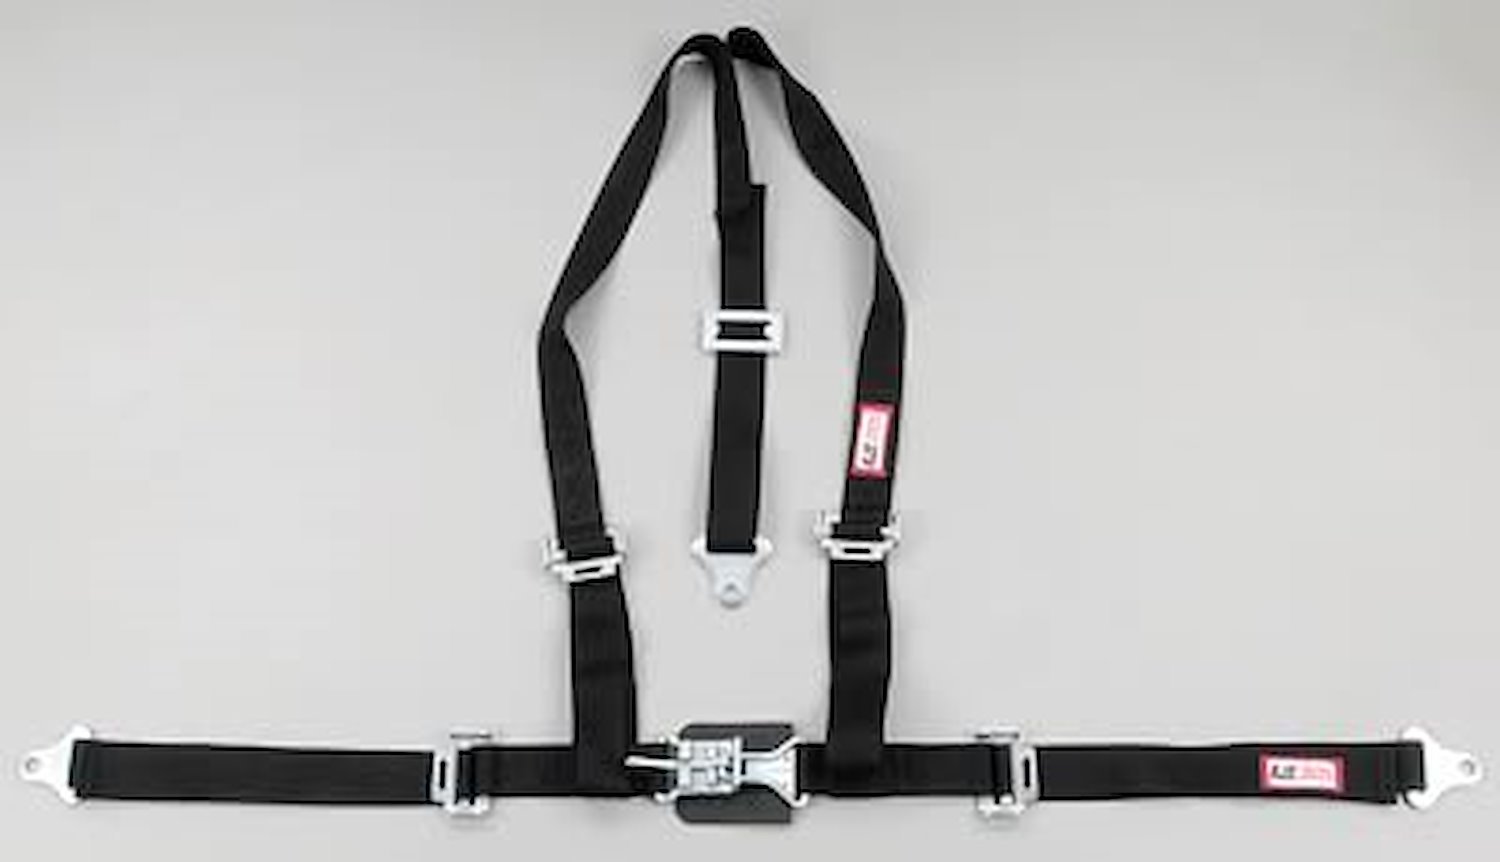 NON-SFI L&L HARNESS 2 PULL UP Lap Belt SEWN IN 2 S.H. INDIVIDUAL FLOOR Mount w/STERNUM STRAP ALL WRAP ENDS KHAKI